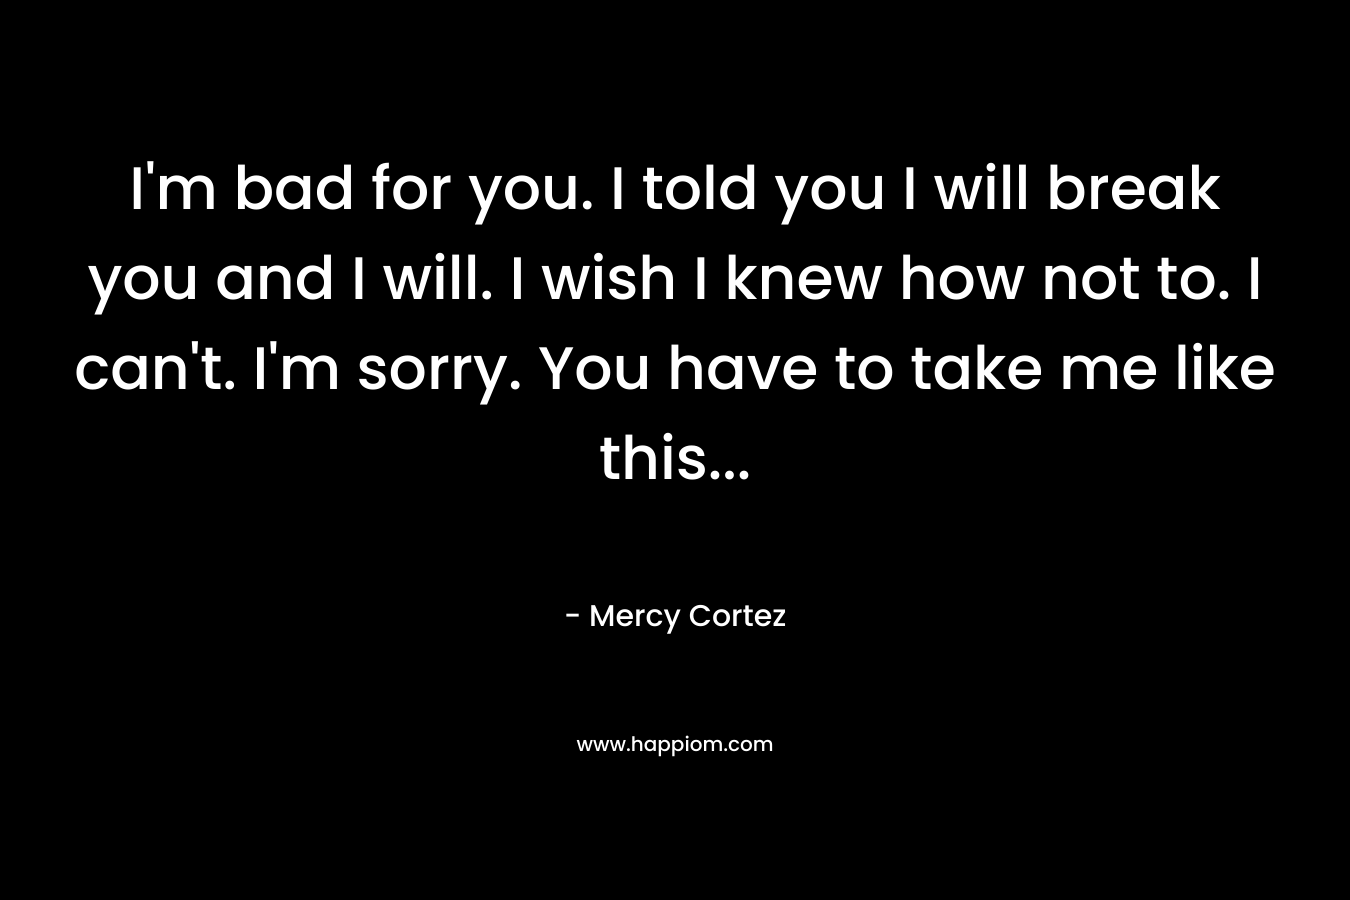 I’m bad for you. I told you I will break you and I will. I wish I knew how not to. I can’t. I’m sorry. You have to take me like this… – Mercy Cortez